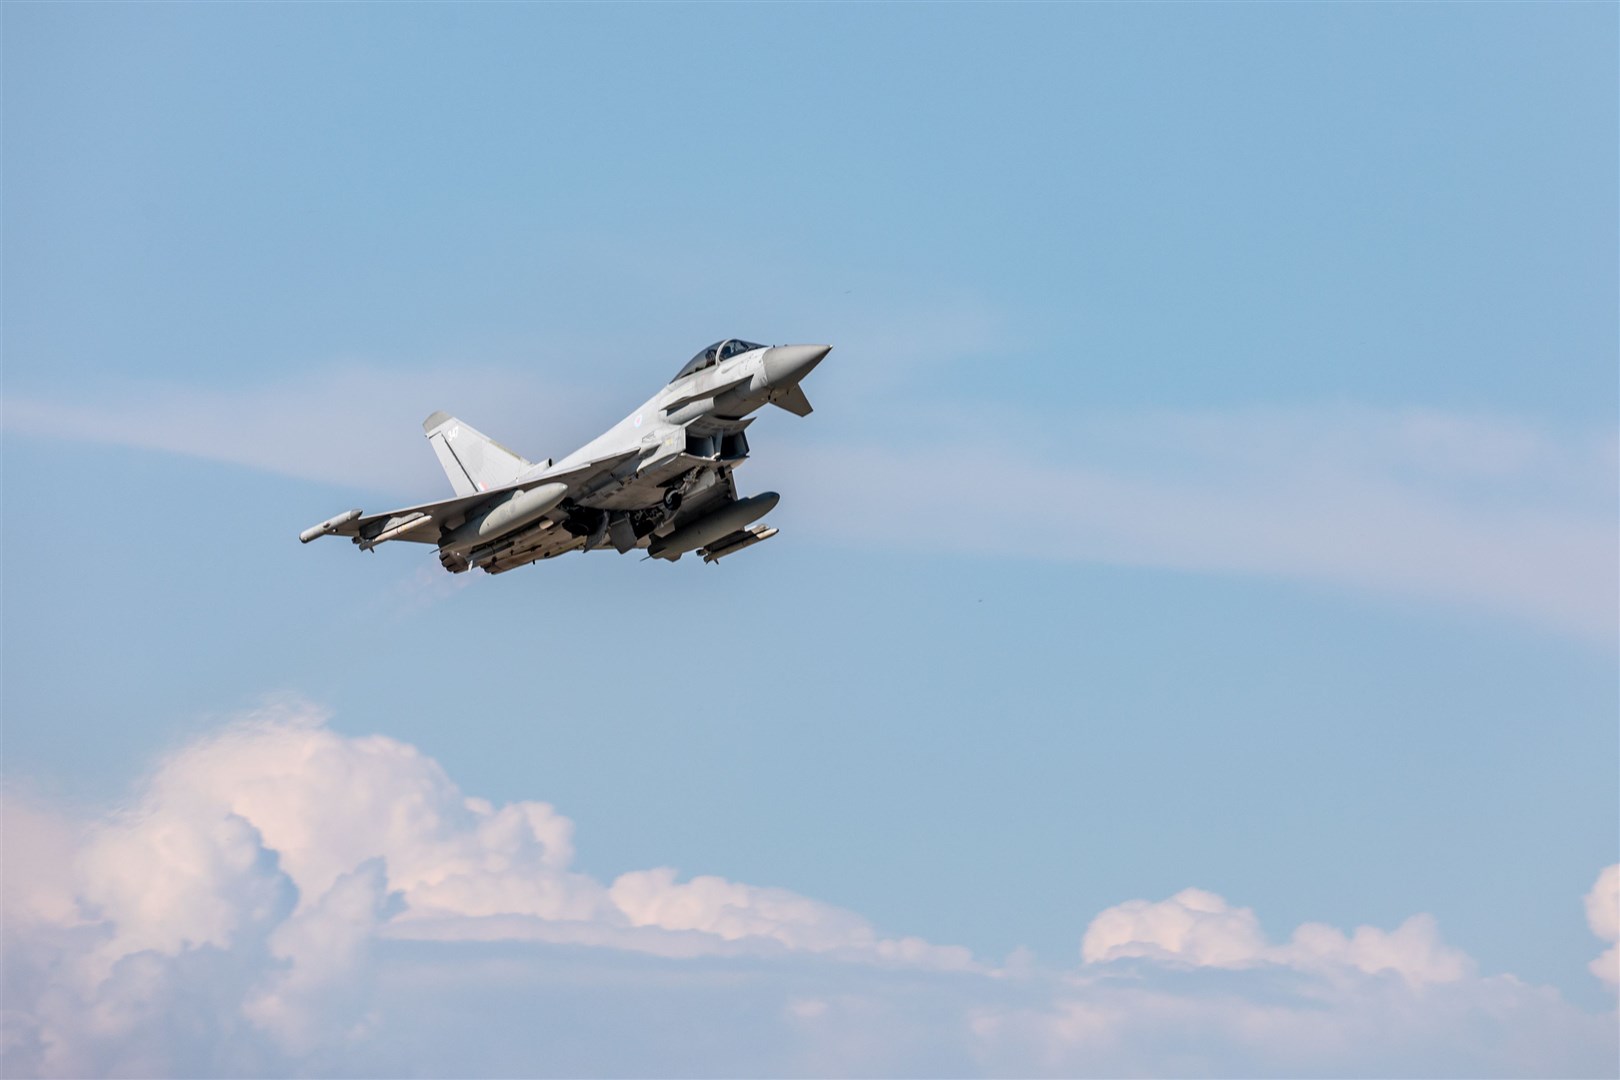 An armed RAF Typhoon taking off from Mihail Kogalniceanu Air Base in Romania as part of Operation BILOXI.